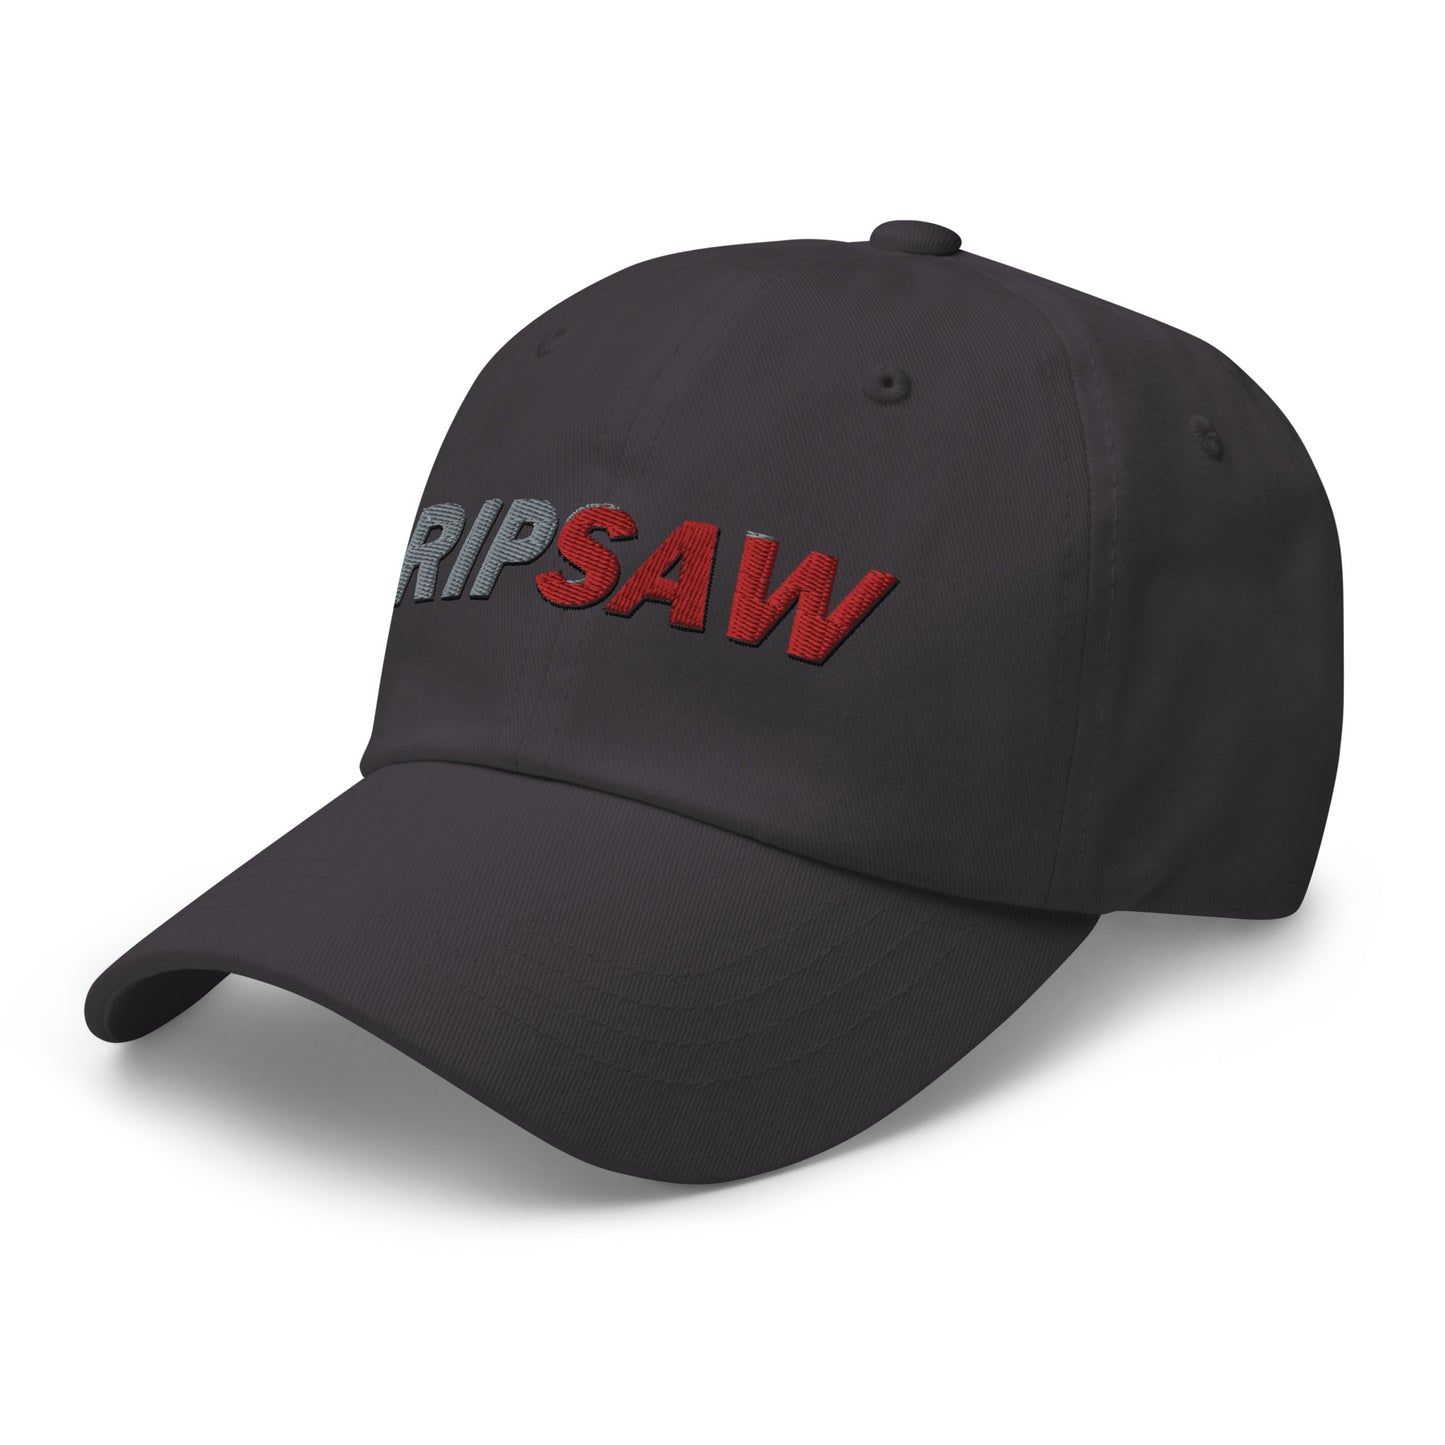 RIPSAW Dad hat